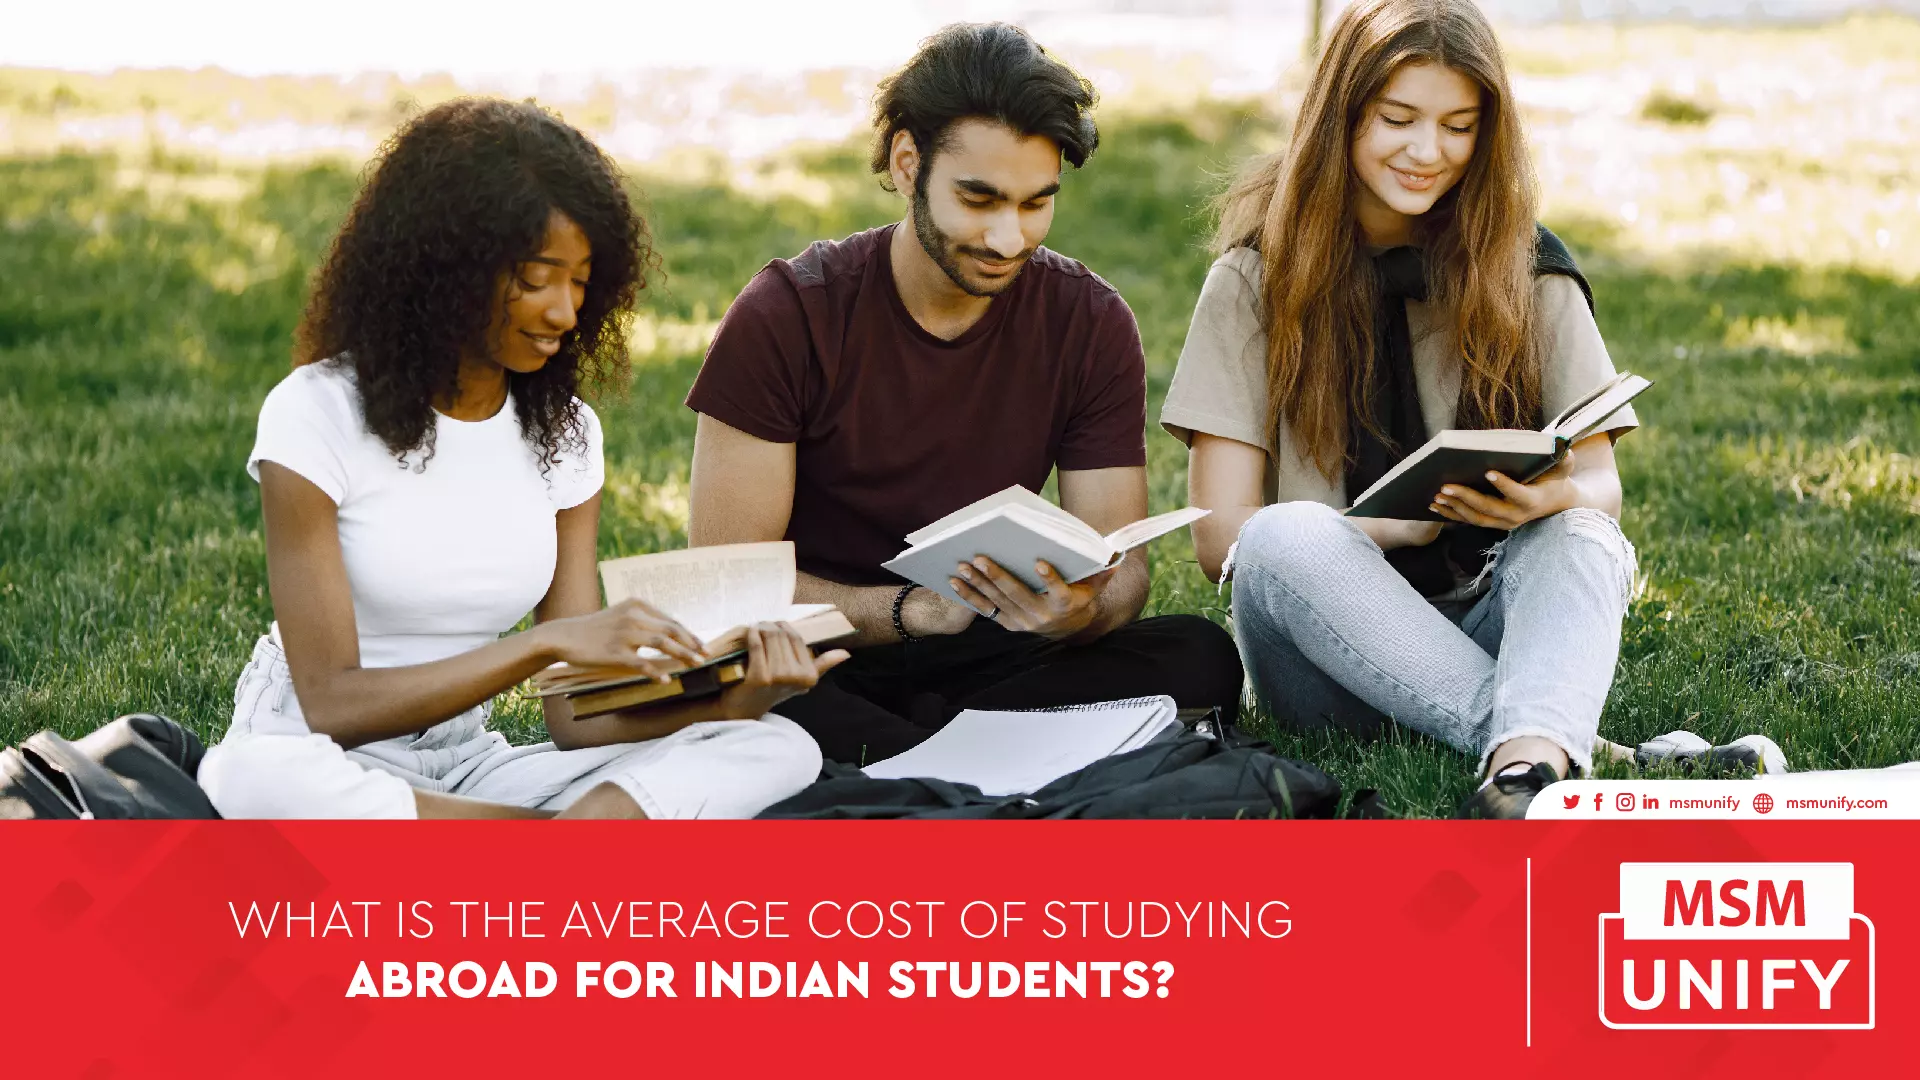 112322 MSM Unify What Is the Average Cost of Studying Abroad for Indian Students 01